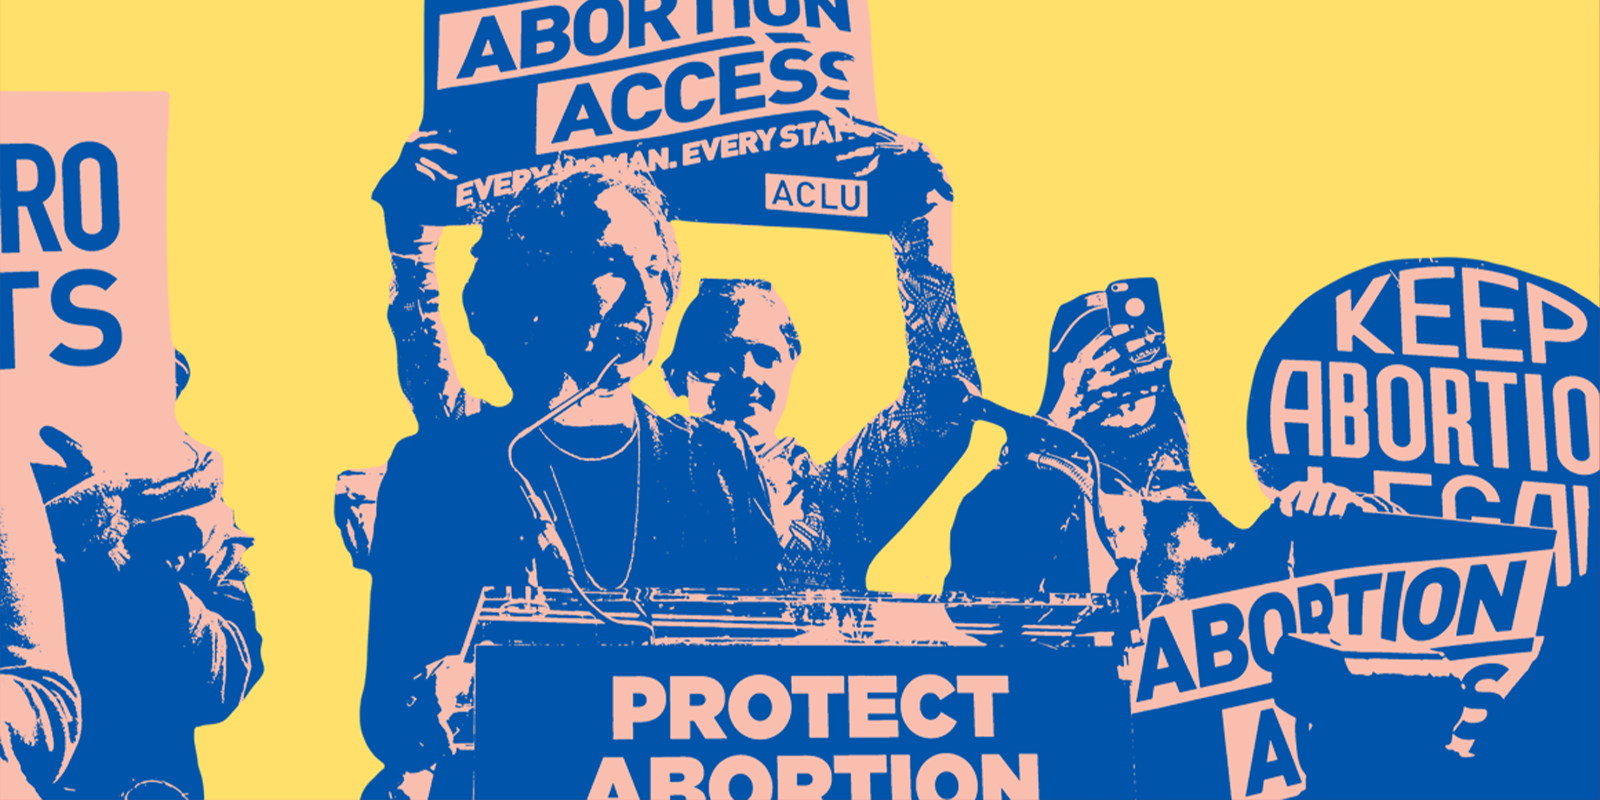 An image of an Abortion Access rally. 